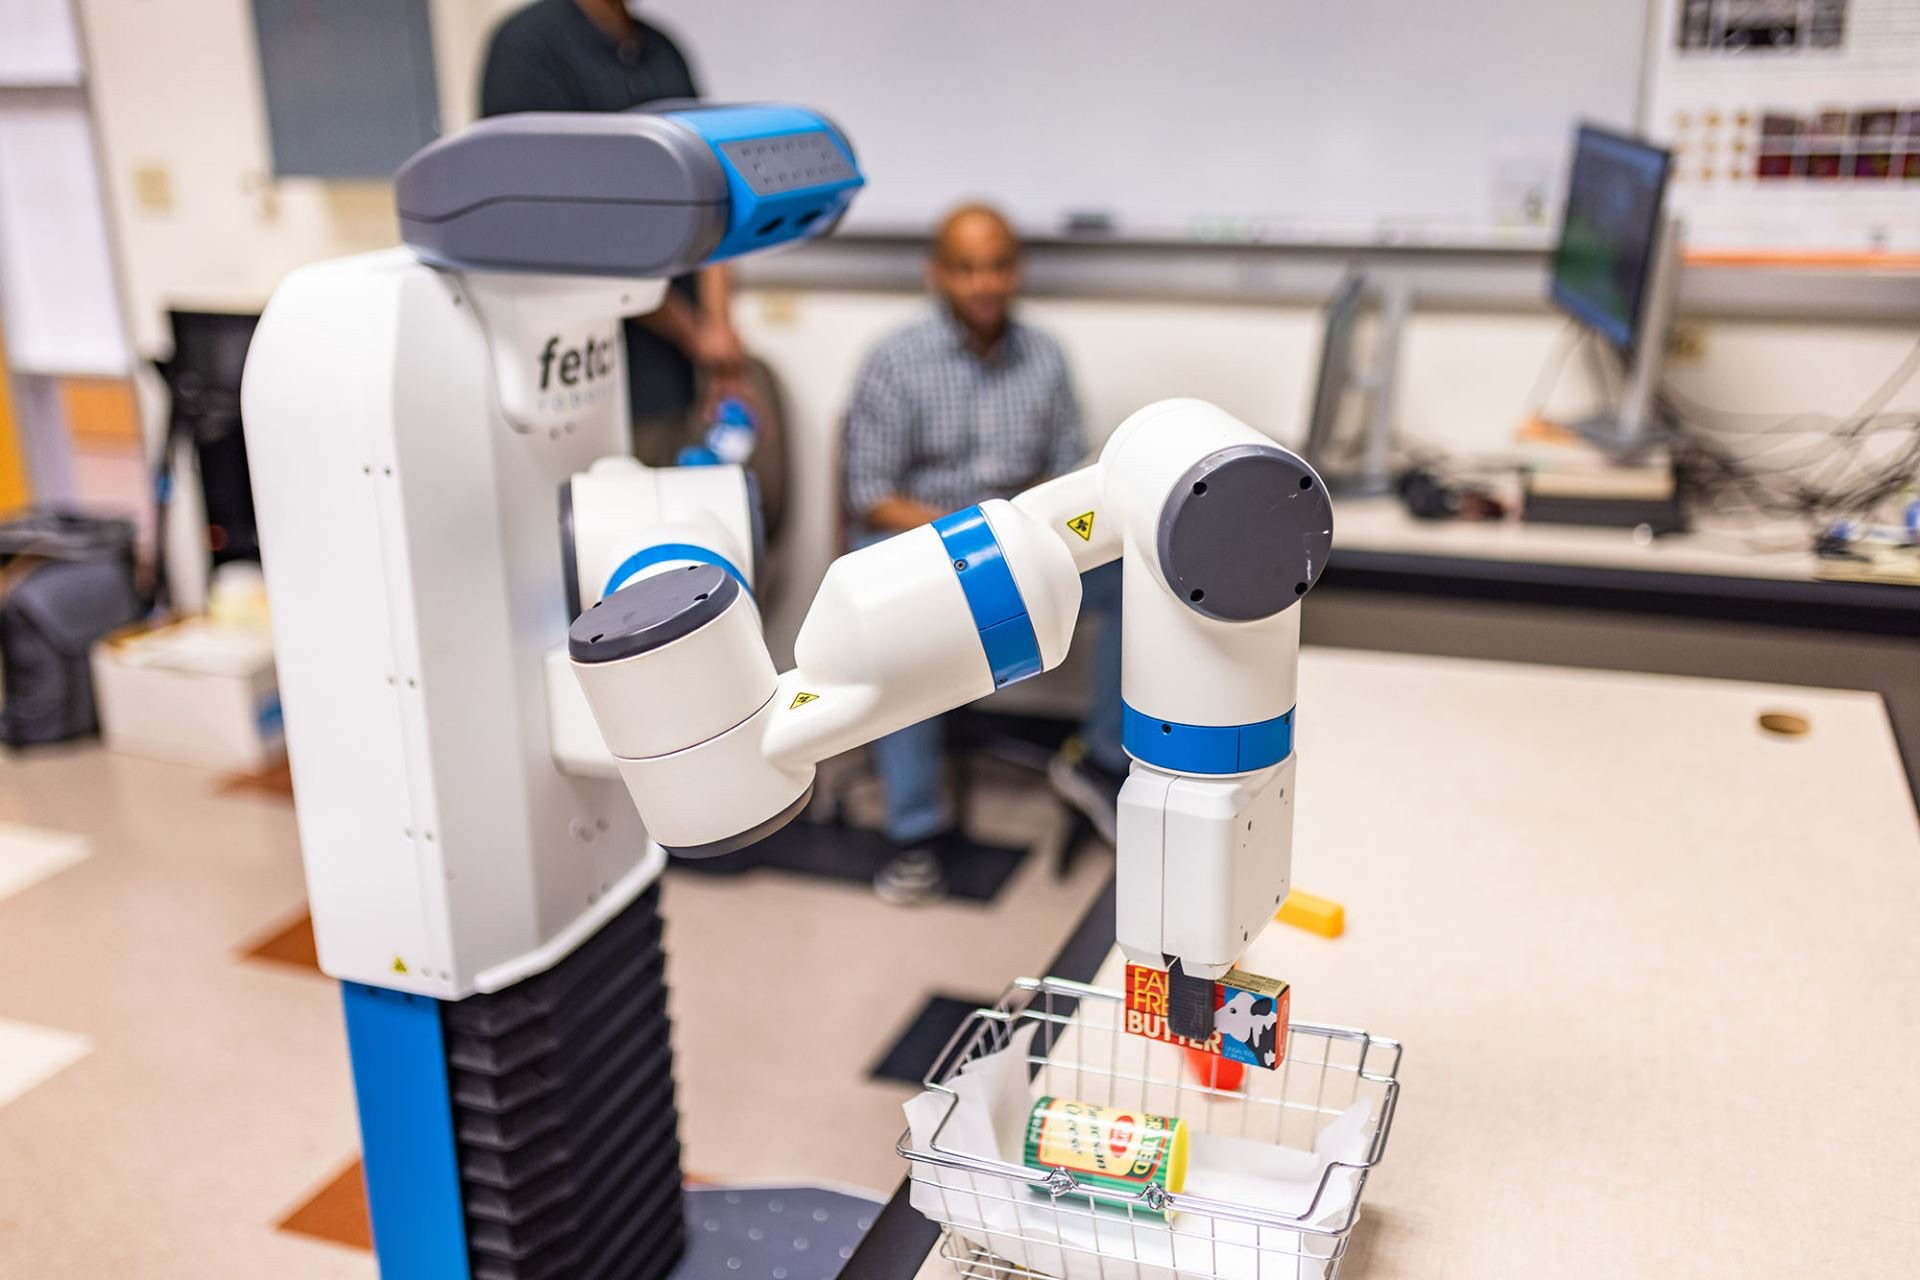 Team’s New AI Technology Gives Robot Recognition Skills a Big Lift